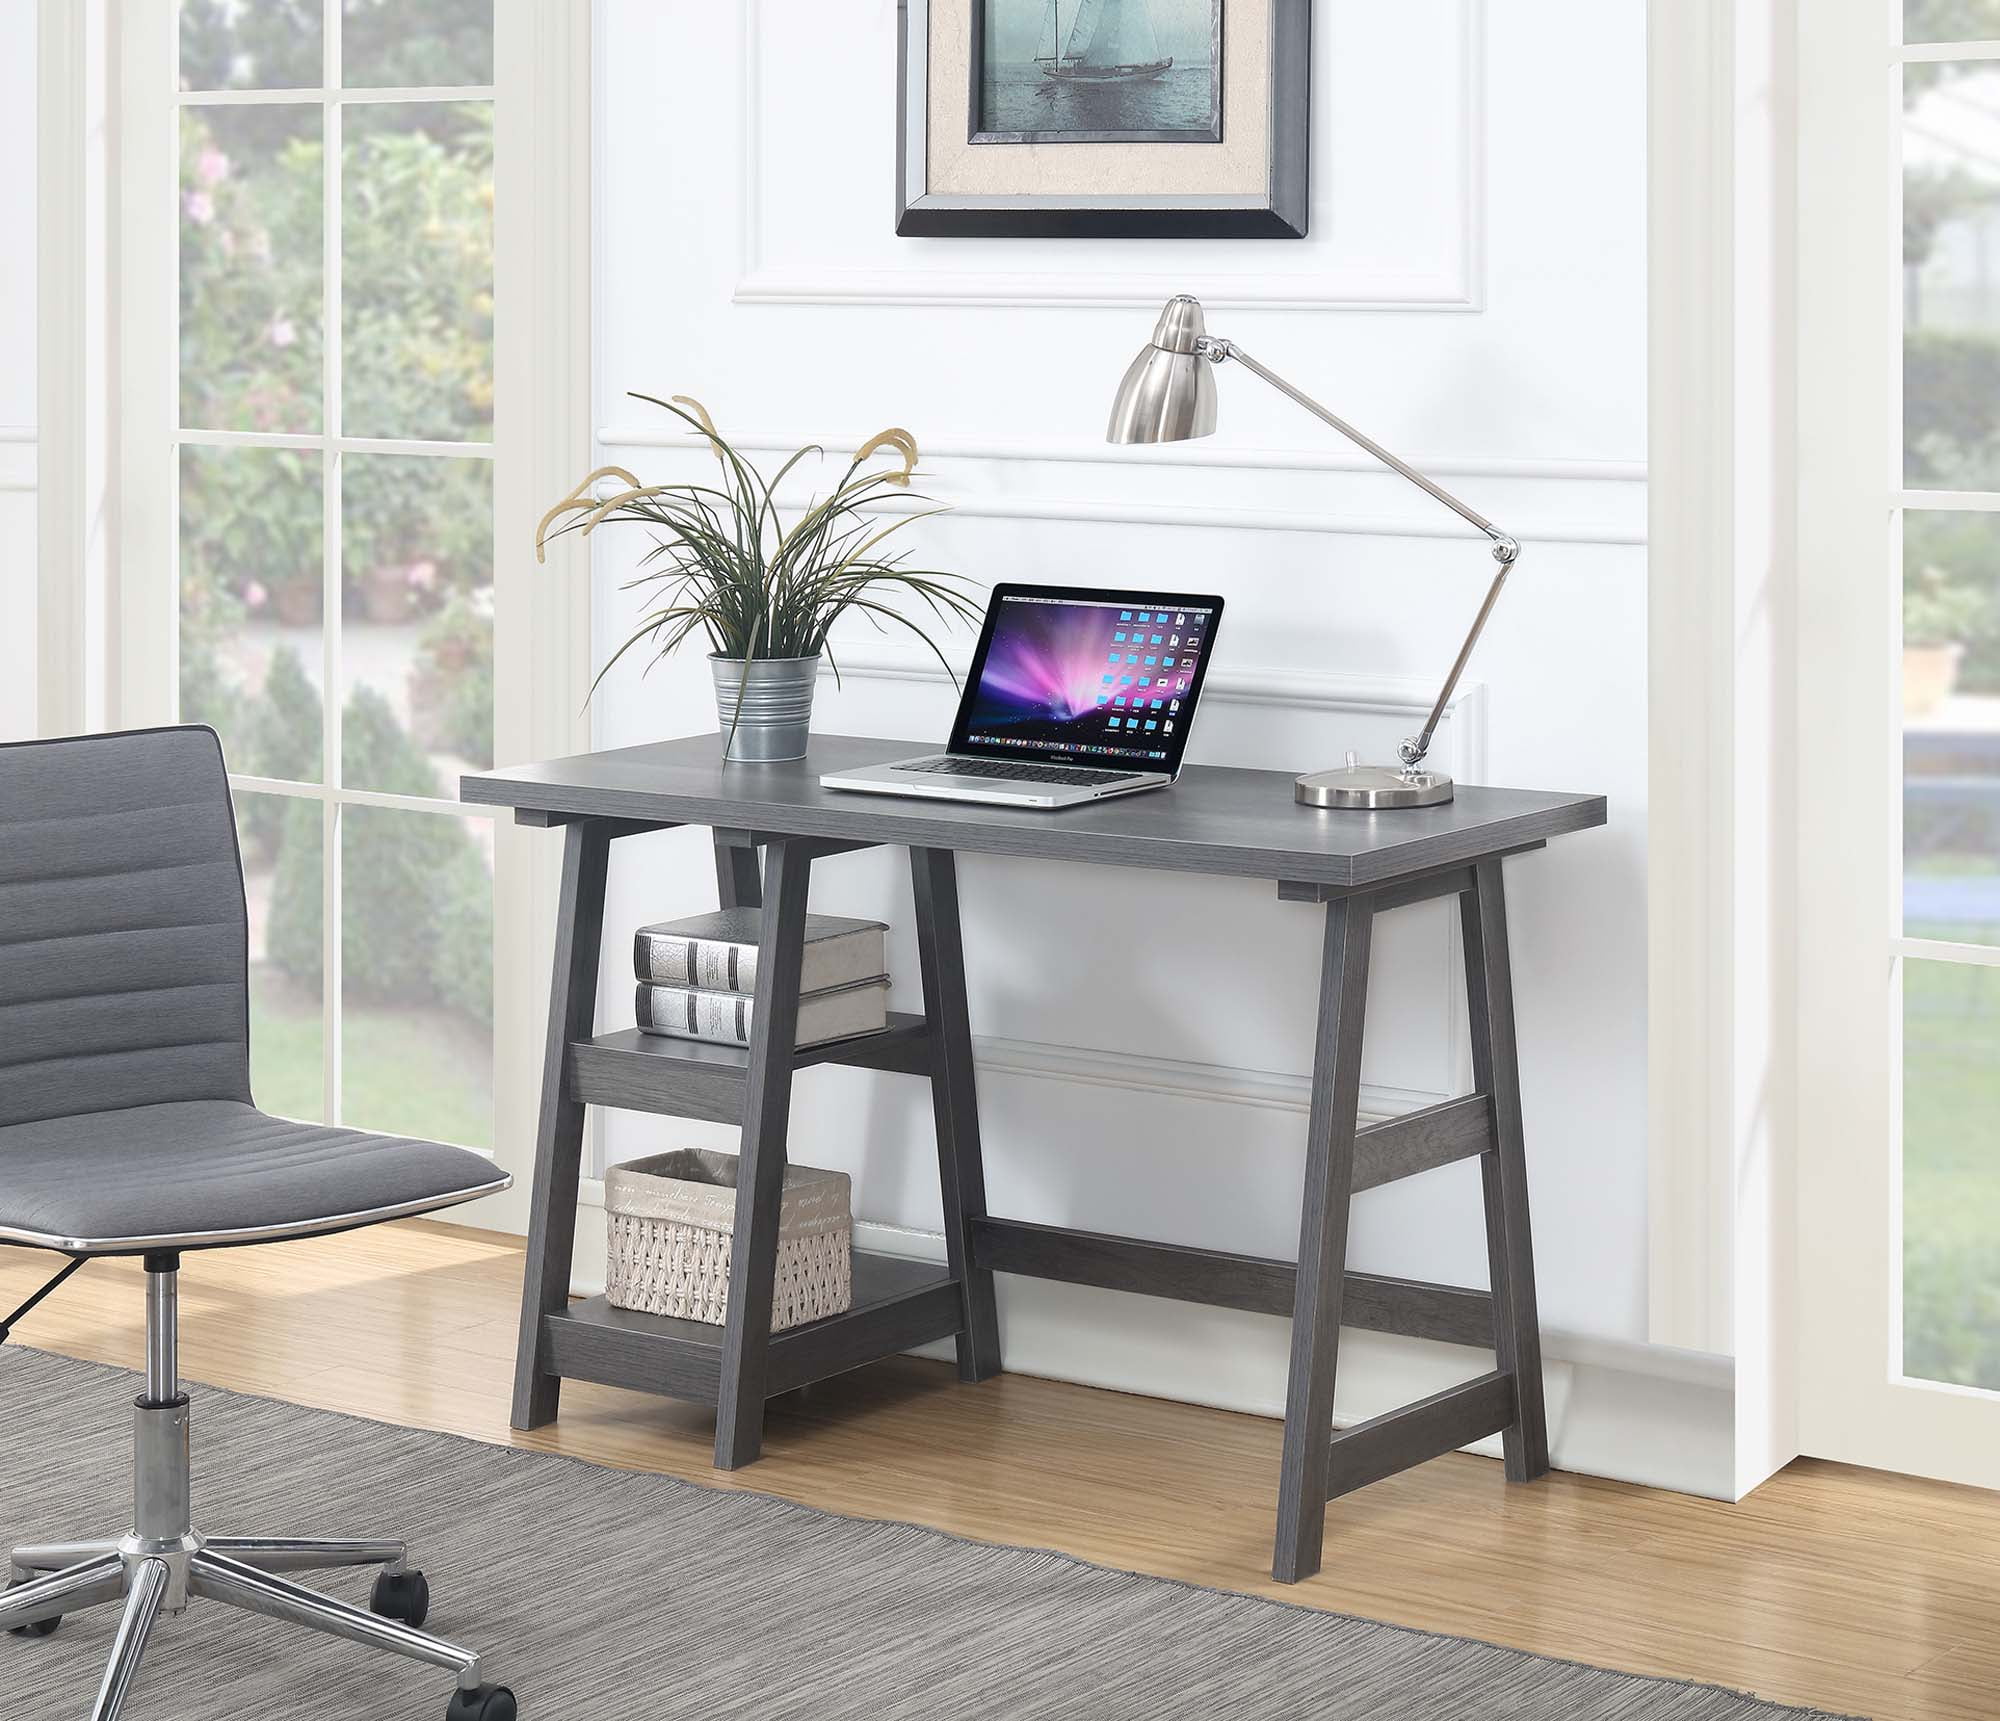 090107cgy Designs2go Trestle Desk, Charcoal Gray - 29.25 X 20.25 X 47 In.